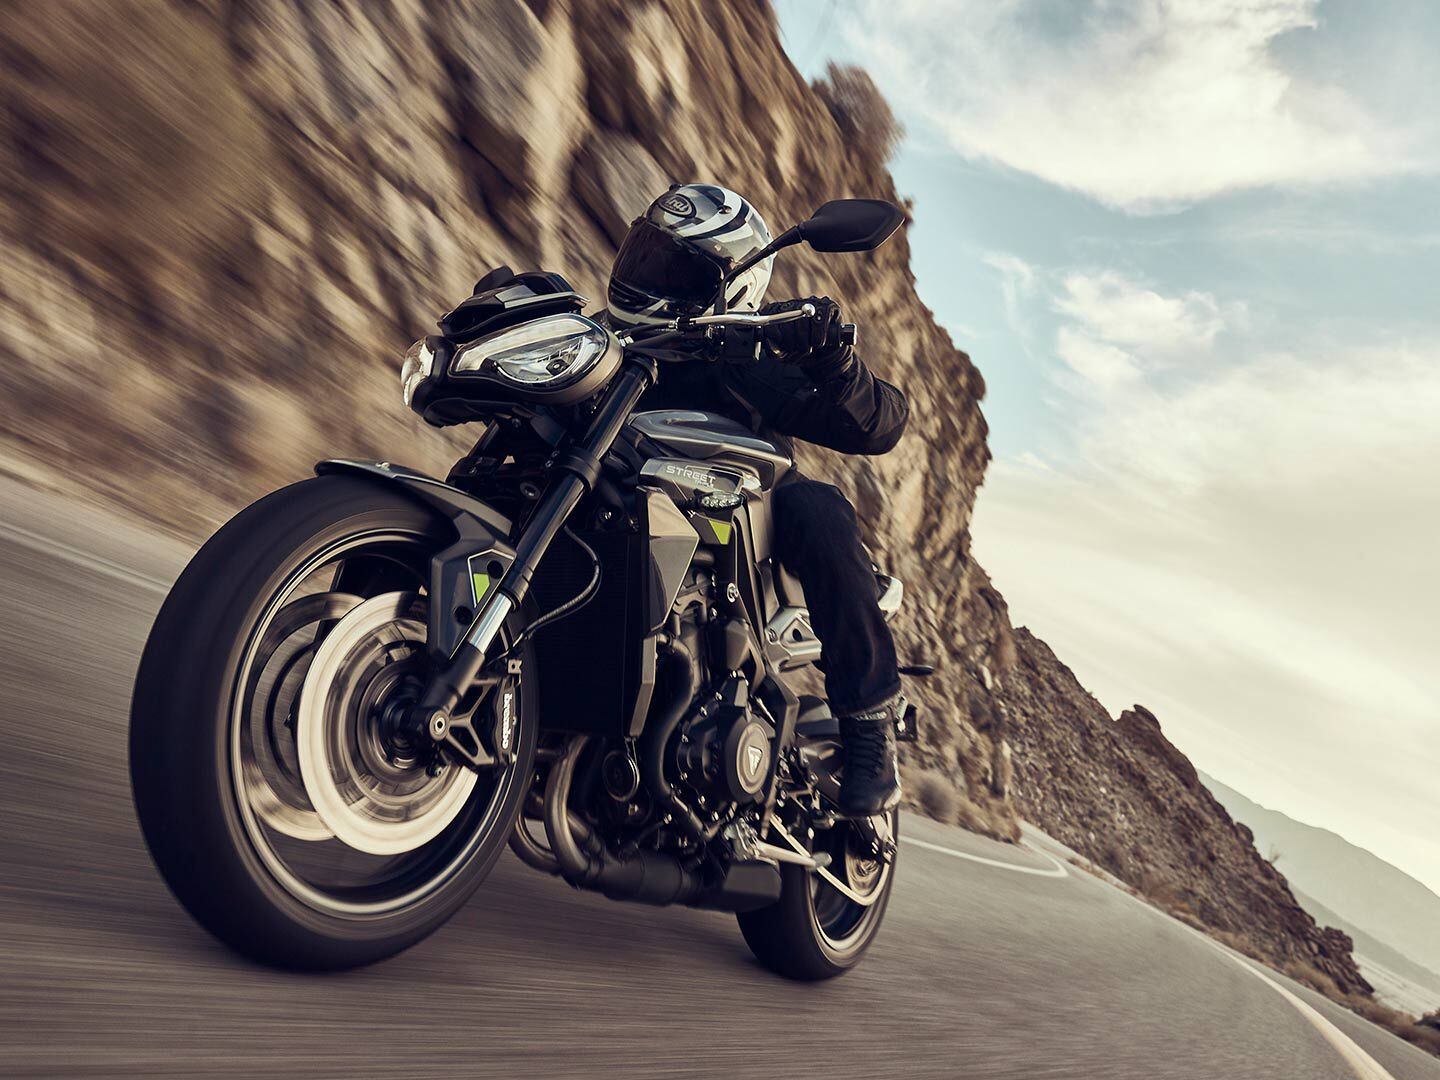 The new Triumph Street Triple 765 R offers a lot of fun for under 10 grand.